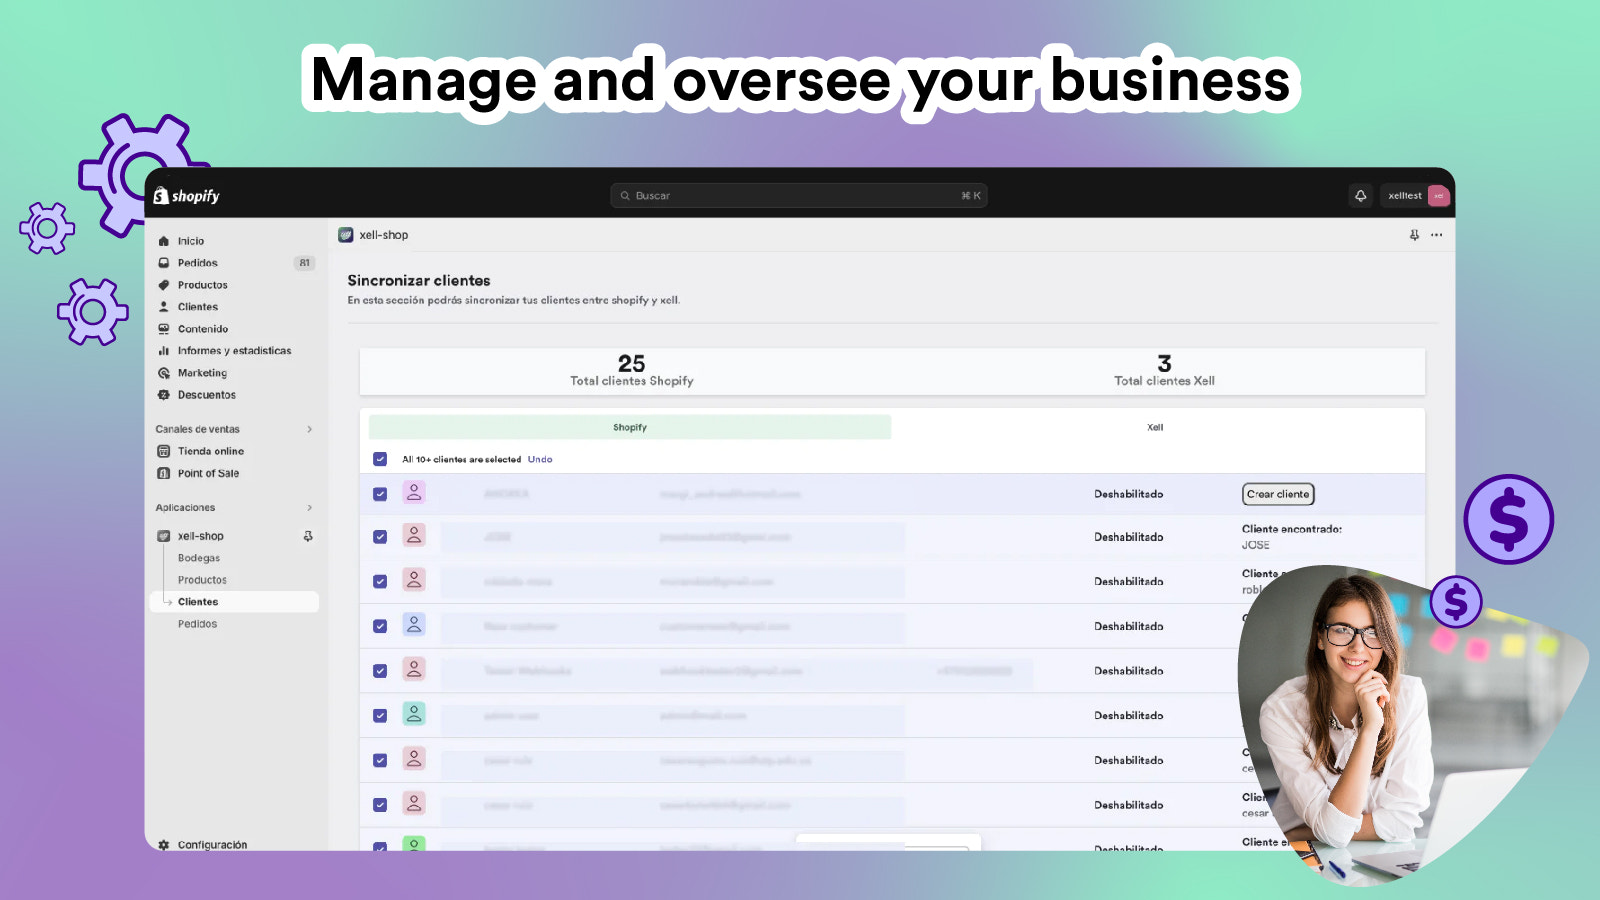 Manage and oversee your business